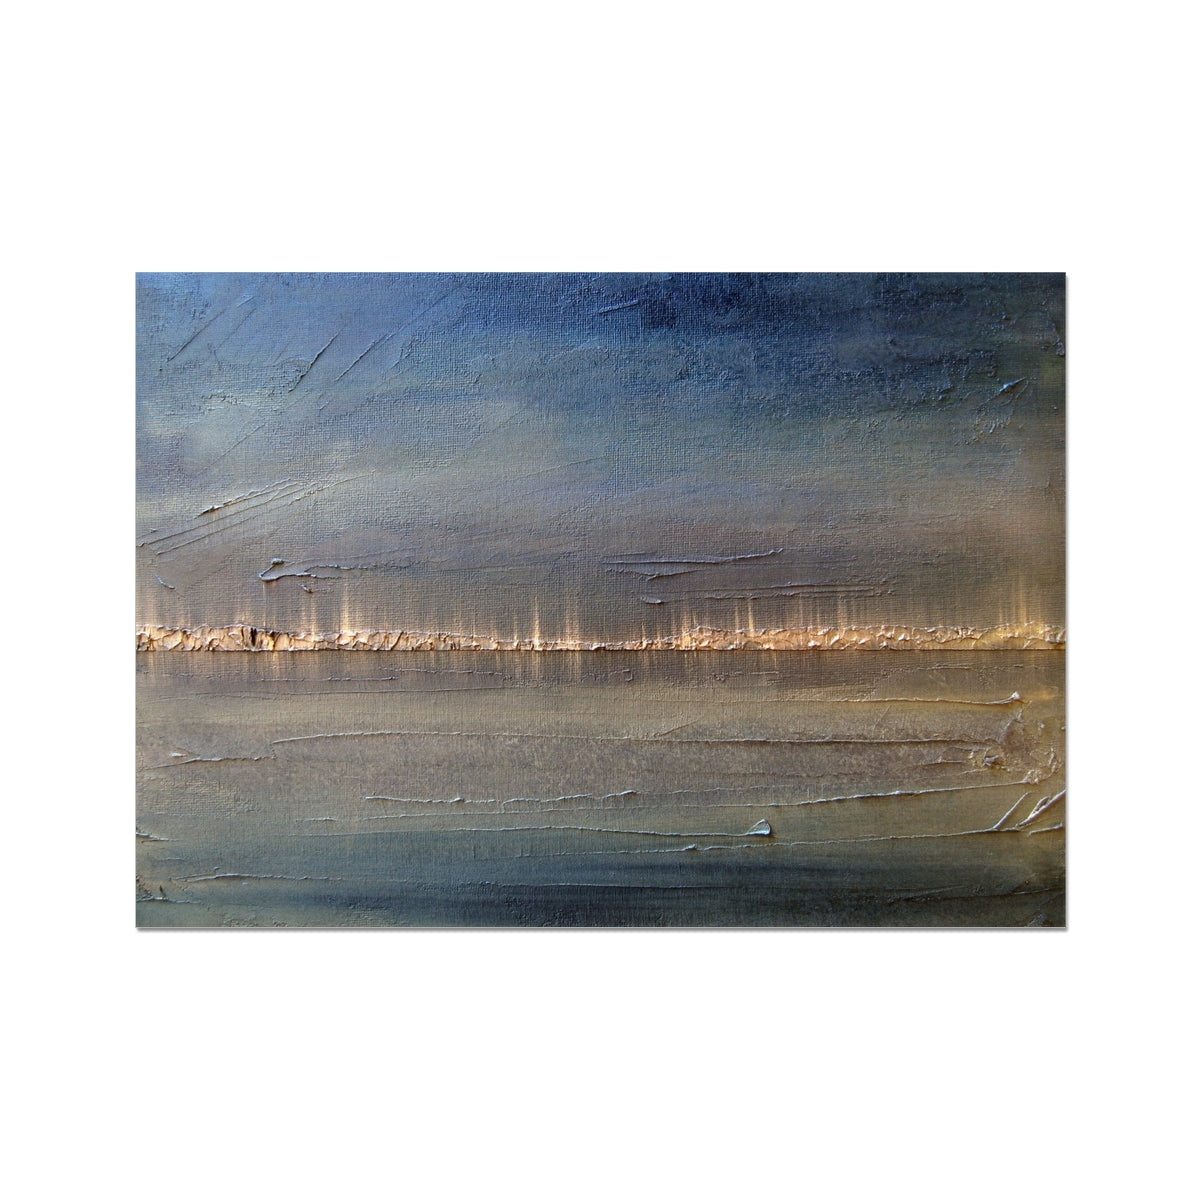 Distant Lights Lake Ontario Painting | Fine Art Prints From Scotland-Unframed Prints-World Art Gallery-A2 Landscape-Paintings, Prints, Homeware, Art Gifts From Scotland By Scottish Artist Kevin Hunter